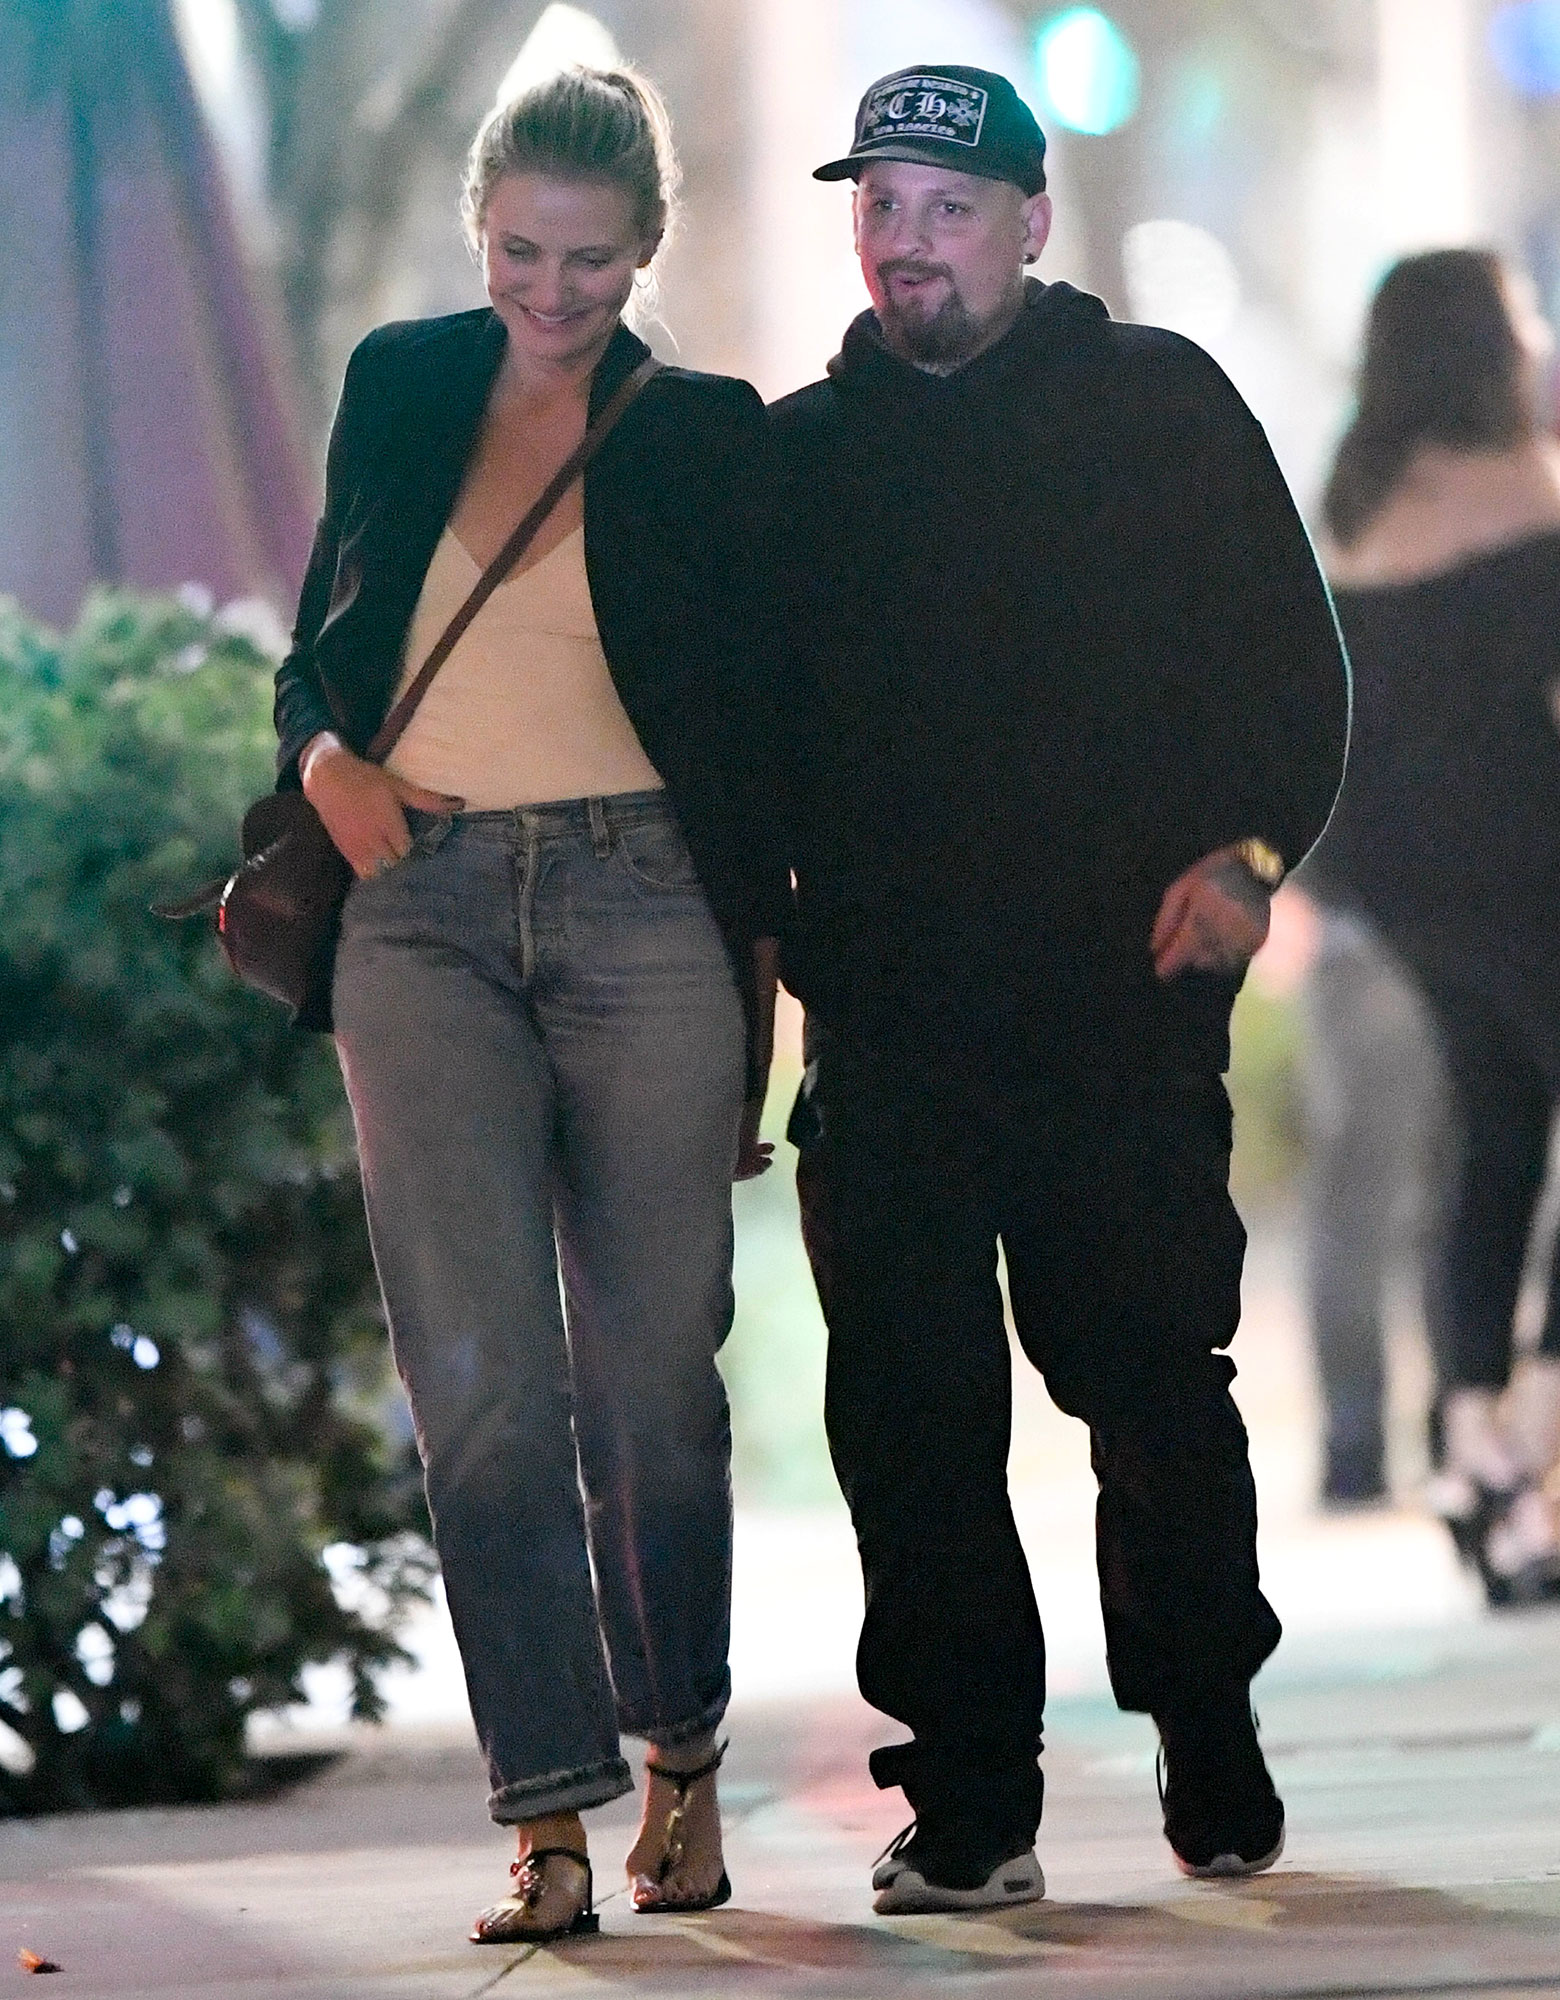 Know About Cameron Diaz Husband, Benji Madden And Their Relationship Info!